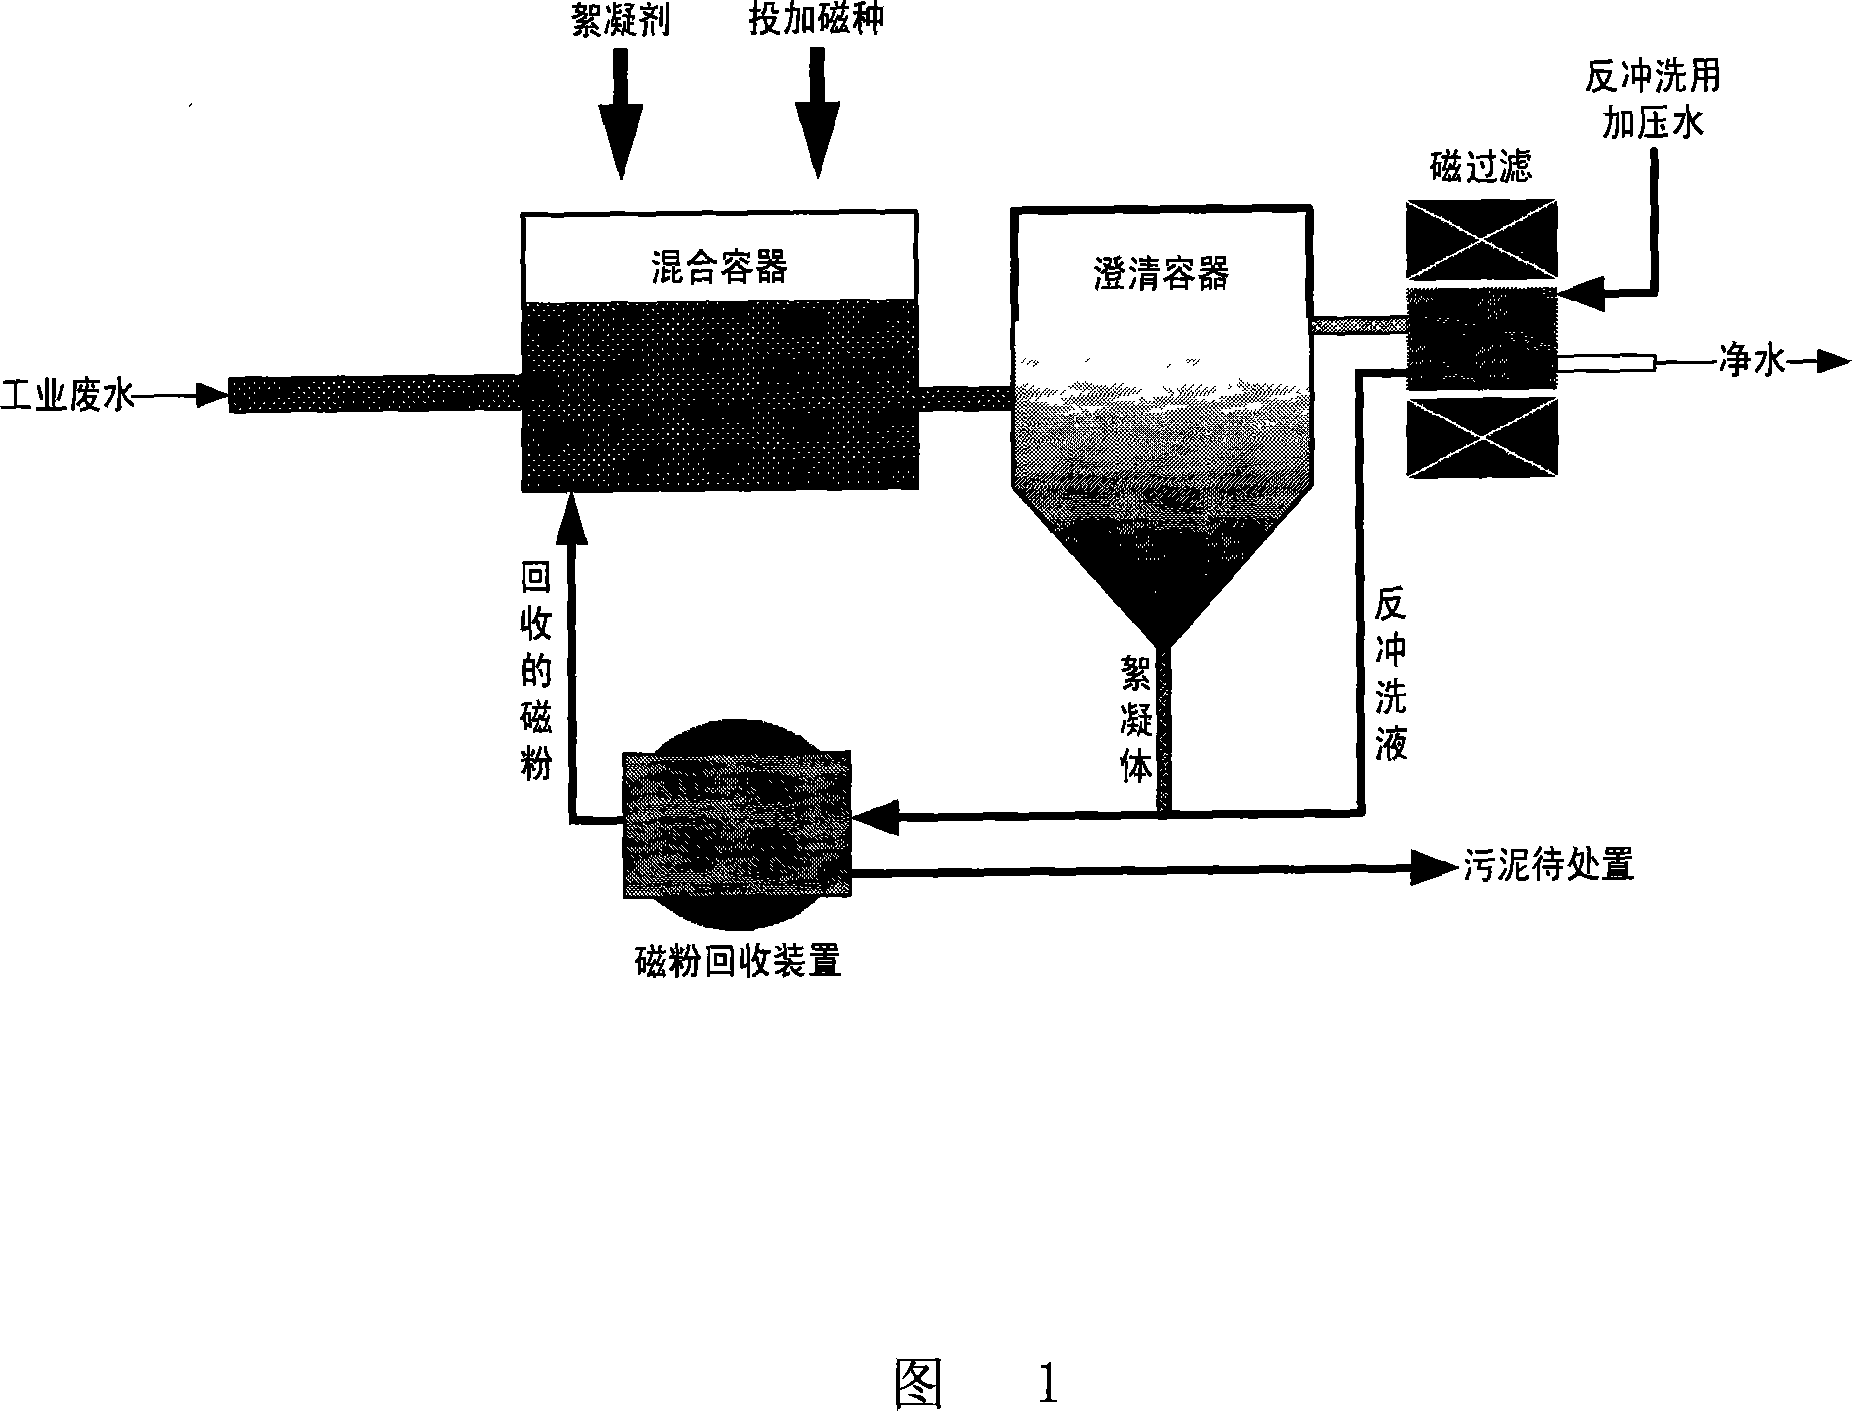 Method for treating industrial wastewater / sewage by two-stage magnetic isolation technique